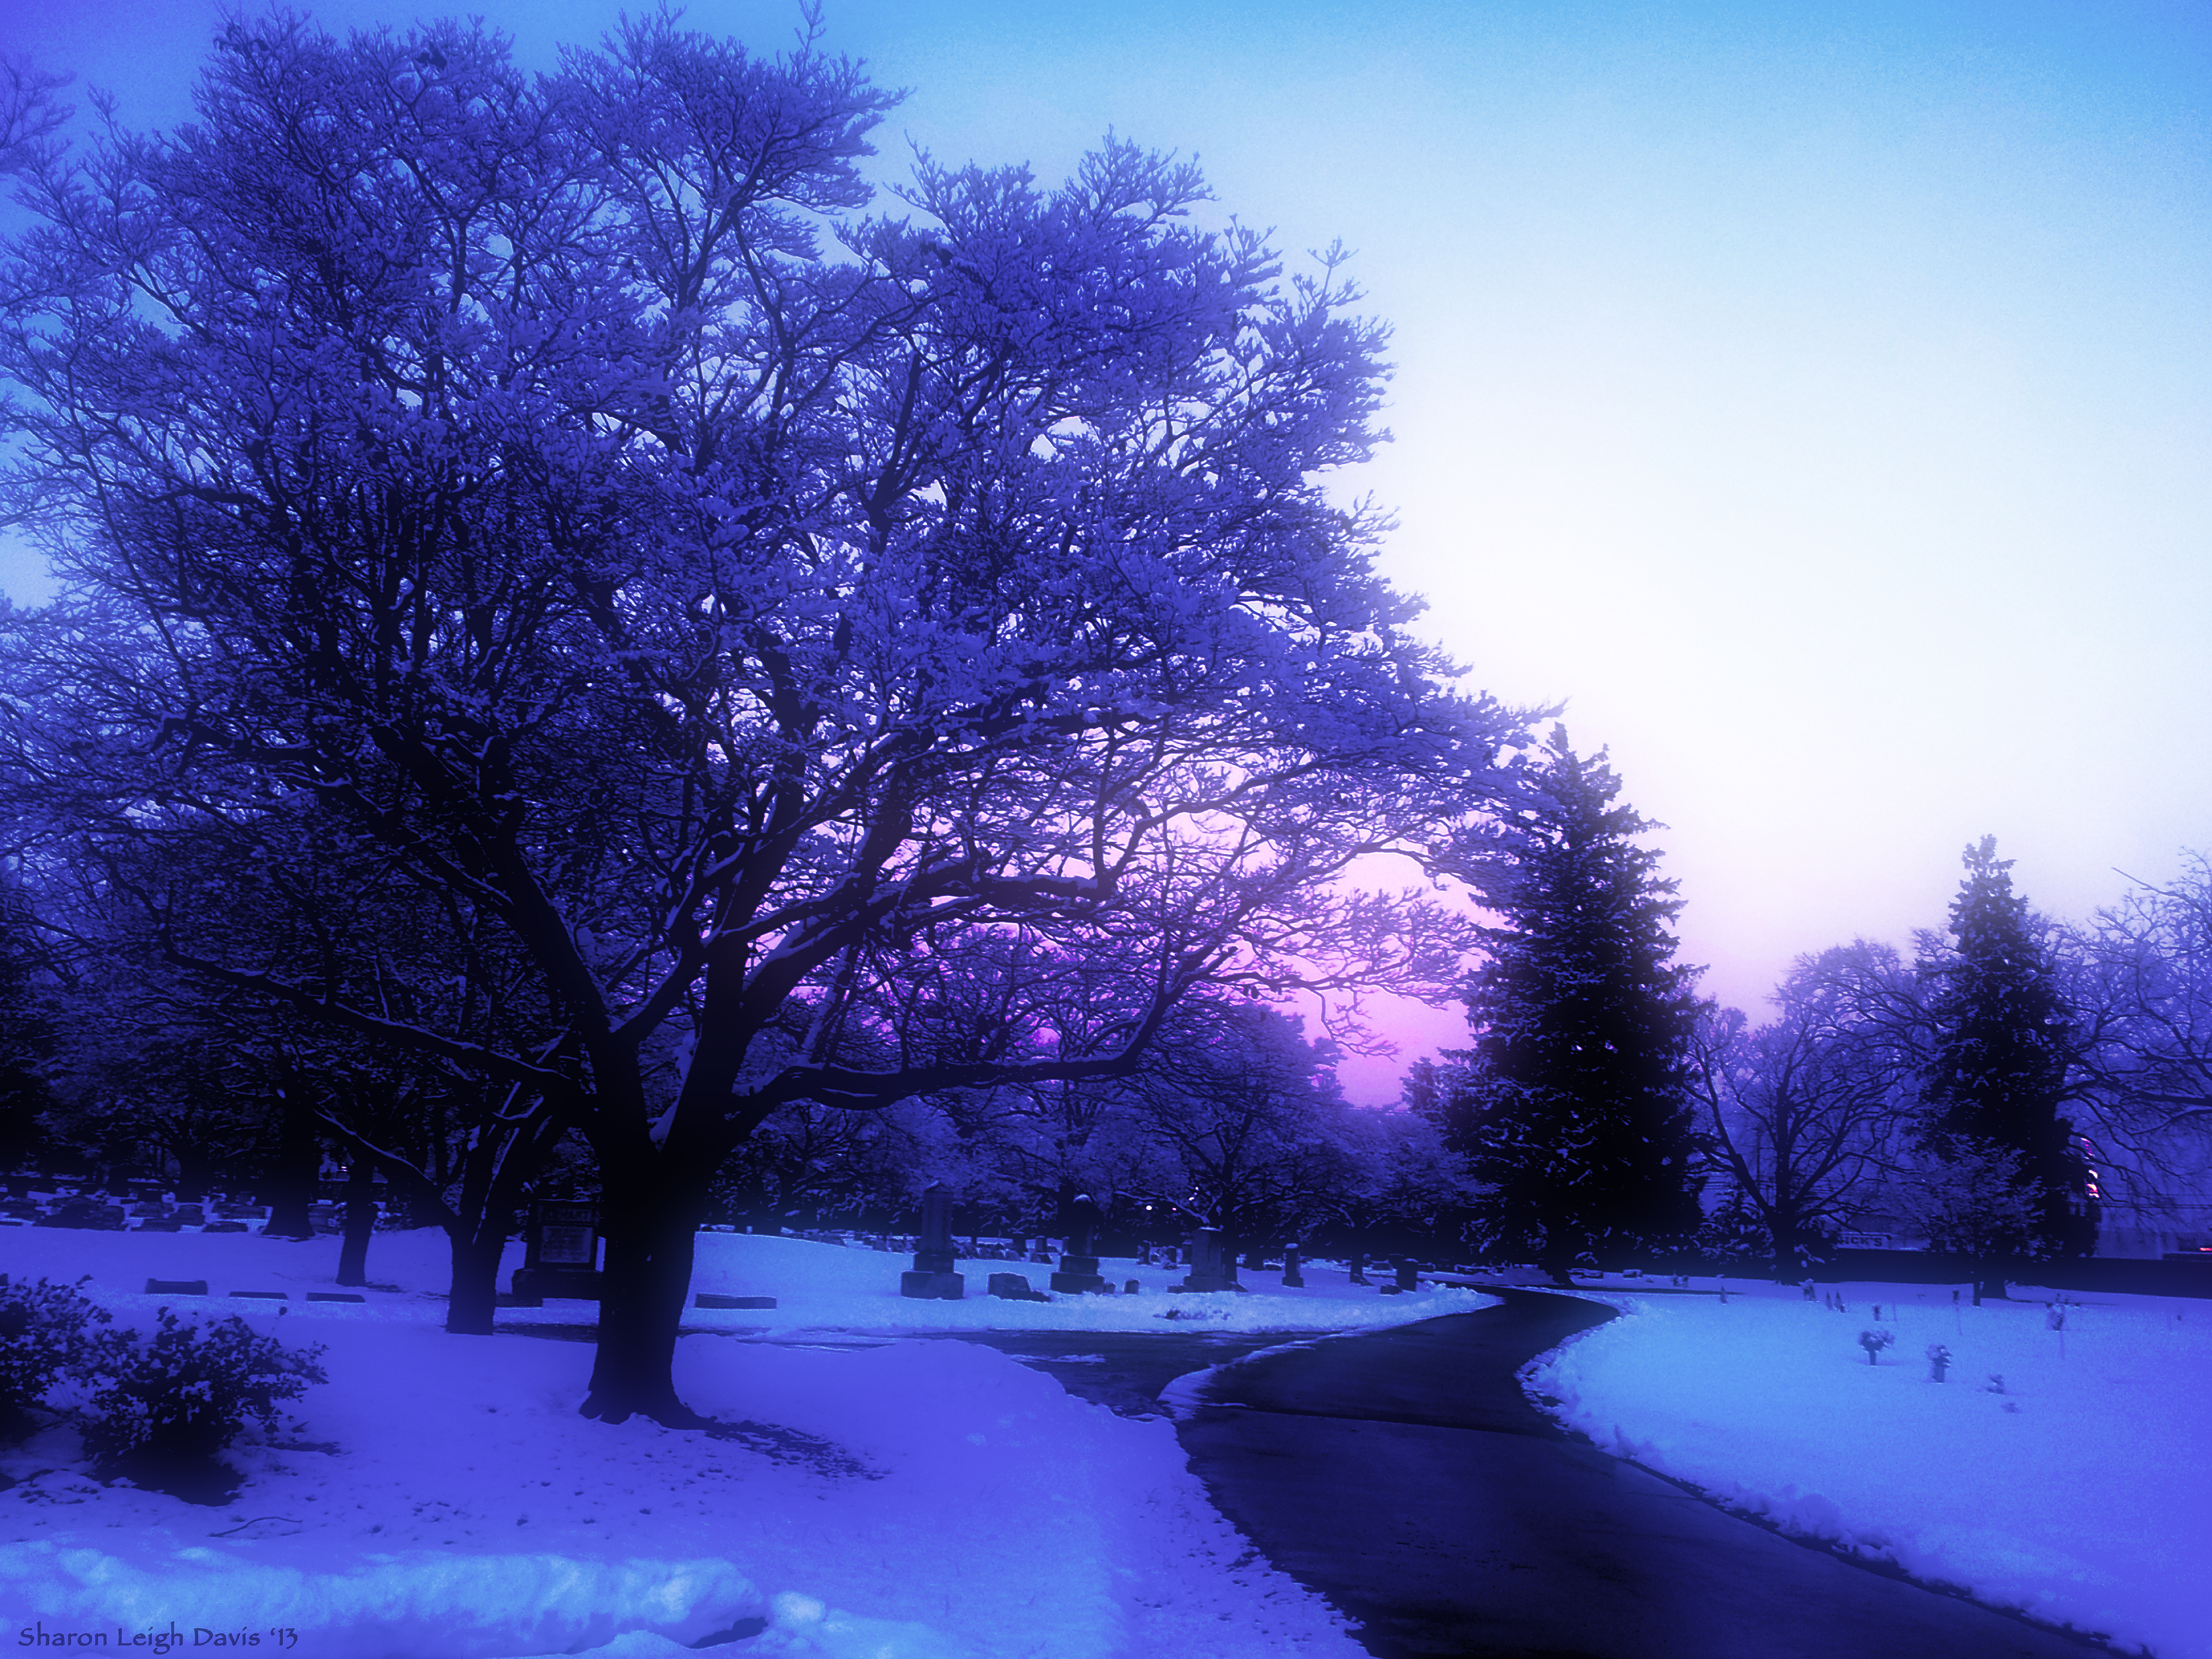 Wallpaper, sunlight, trees, landscape, sunset, nature, sky, snow, winter, purple, branch, blue, ice, evening, morning, mist, frost, lavender, cemetery, dusk, path, Freezing, light, tree, dawn, daytime, computer wallpaper, atmosphere of earth